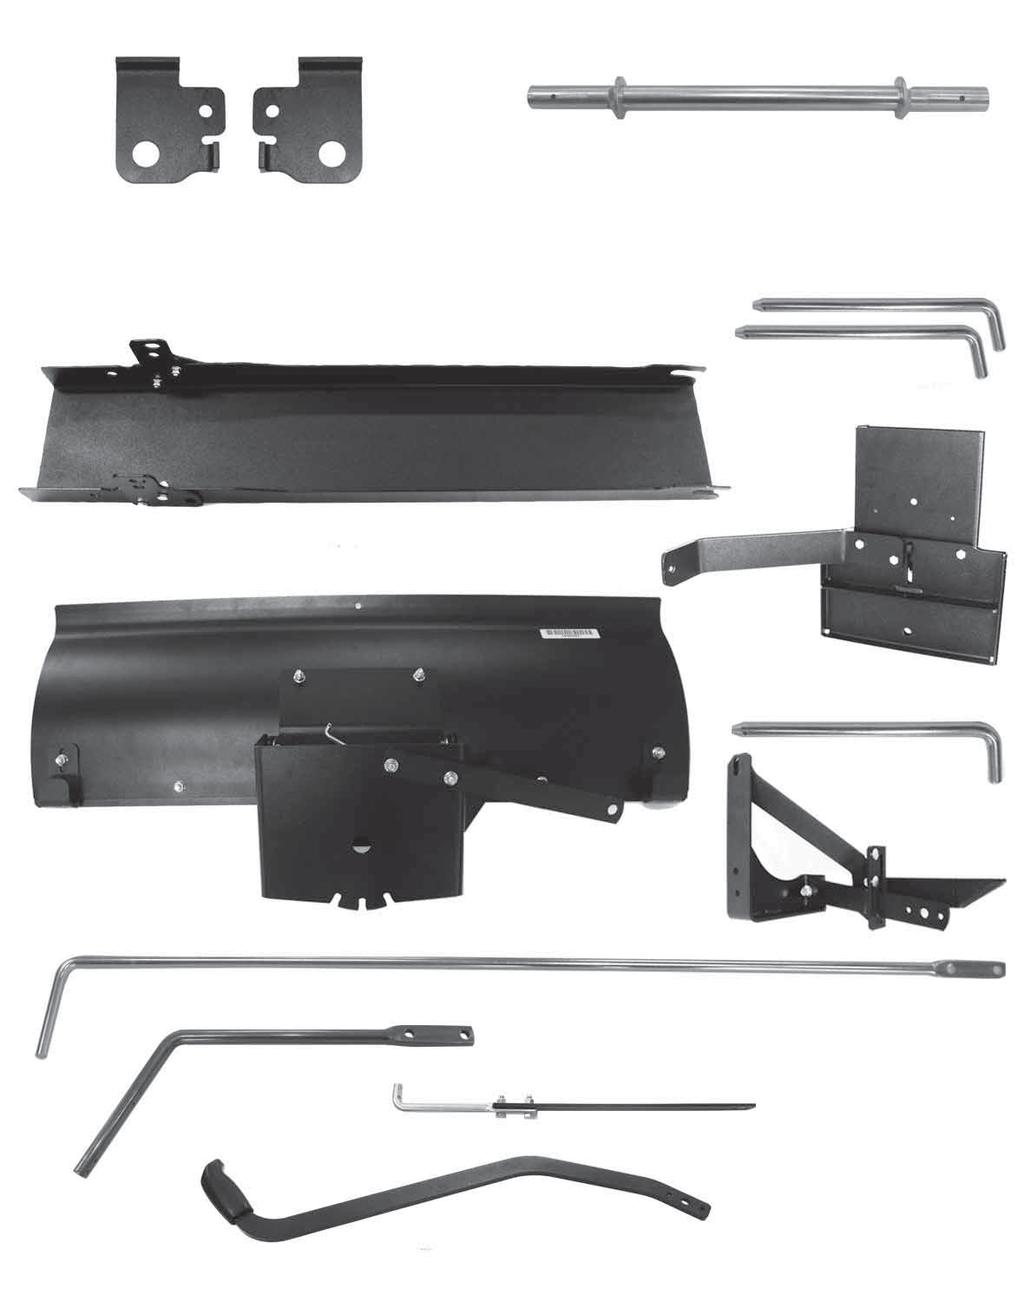 16906096 SNOW BLADE & HITCH / Box Contents AA - HITCH SUPPORTS Right (Hardware Bag) BB - HITCH SUPPORTS Left (Hardware Bag) CC - REAR SUPPORT ROD DO NOT USE with THIS KIT DO NOT USE with THIS KIT EE